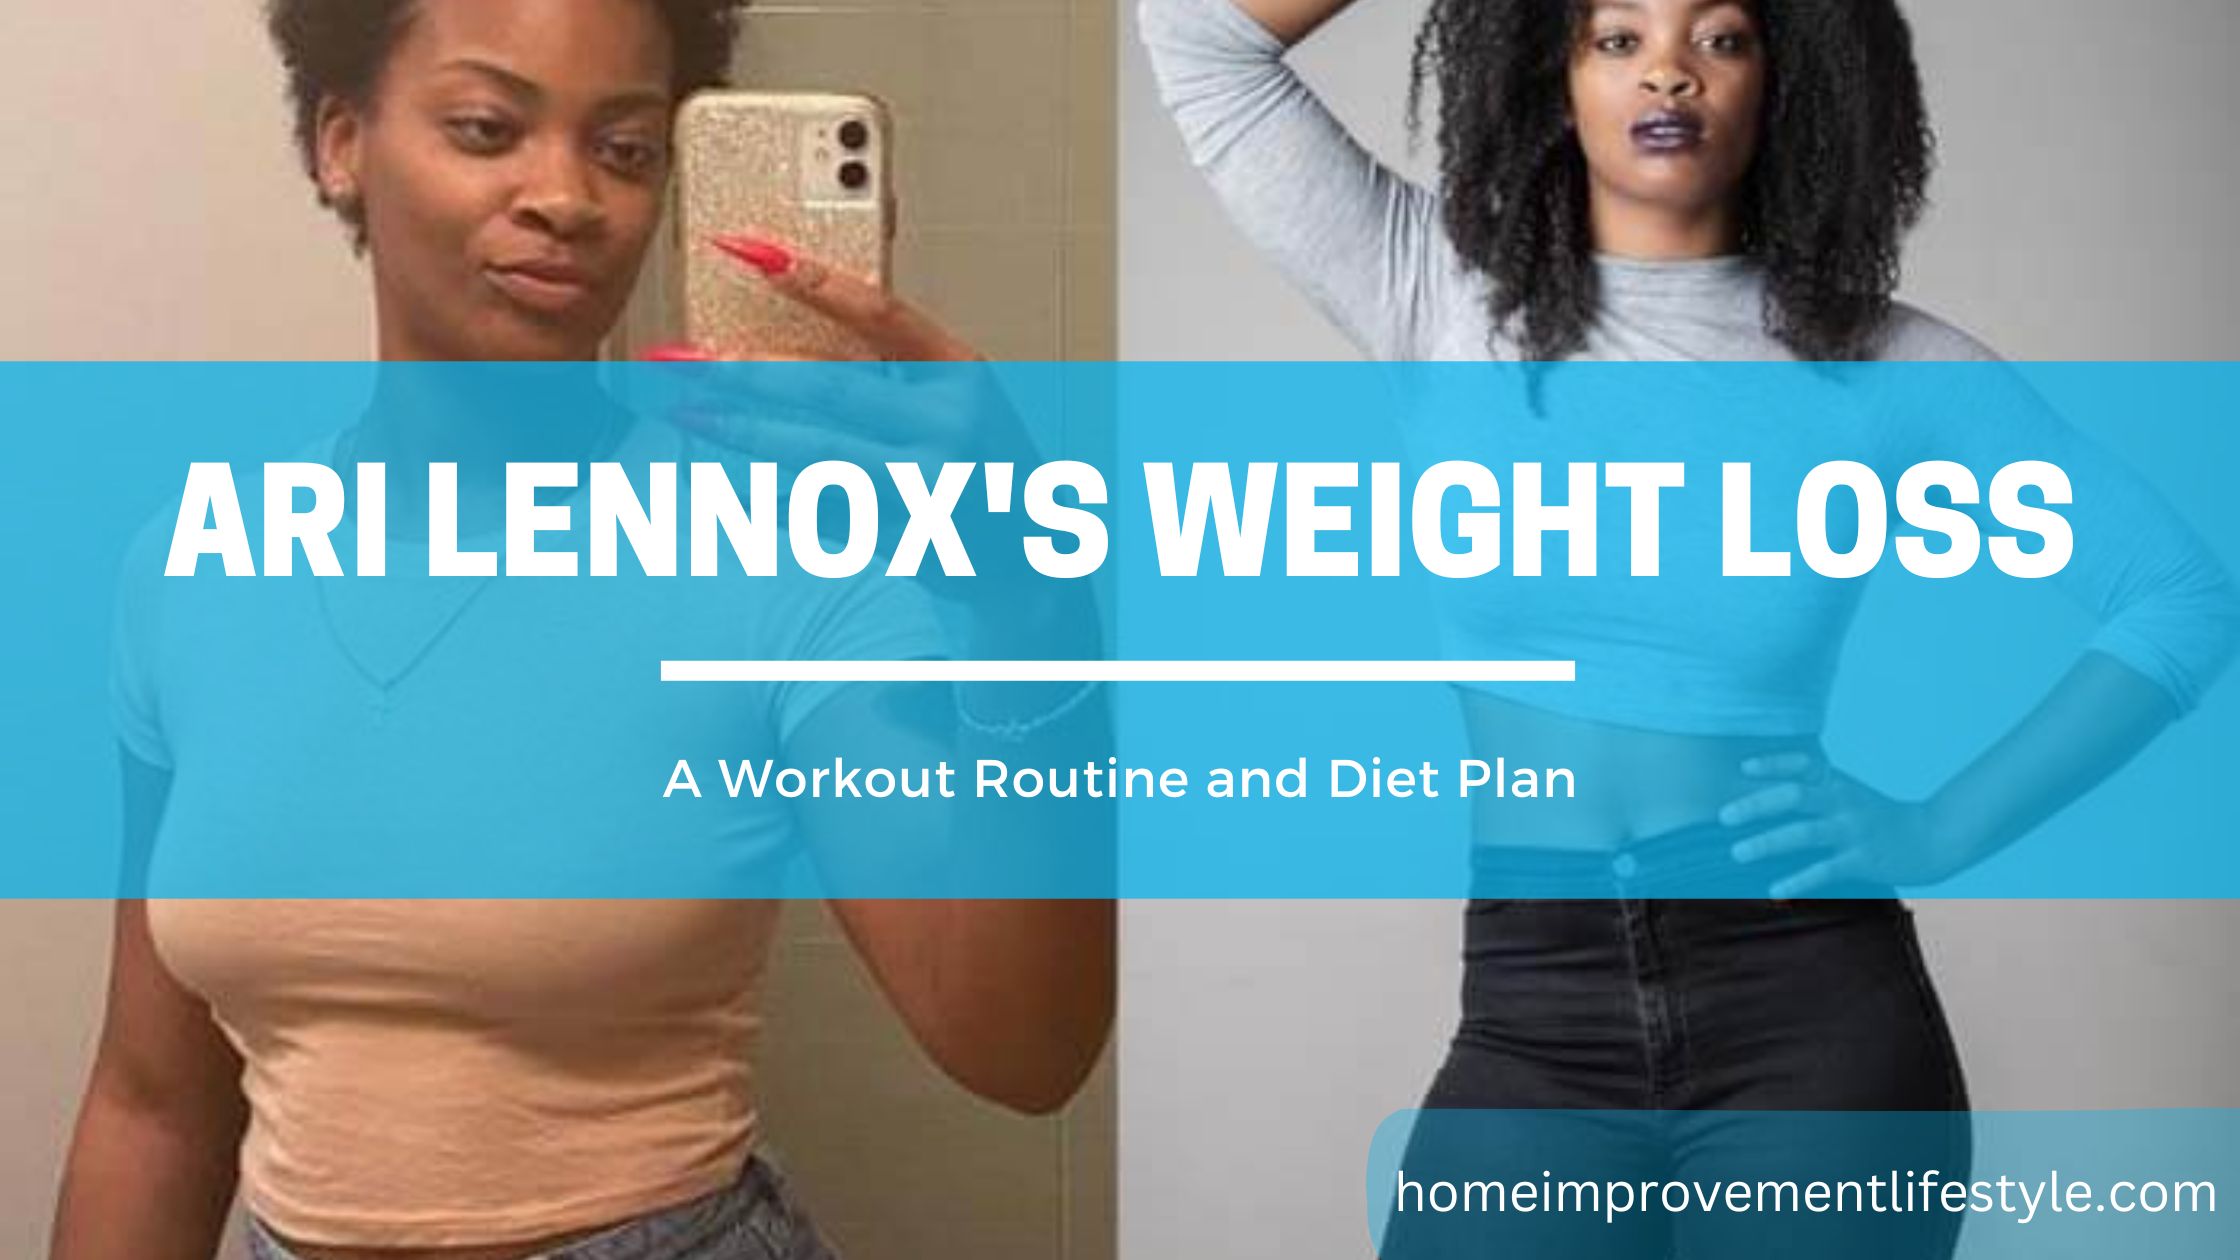 A Workout Routine and Diet Plan of Ari Lennox's Weight Loss